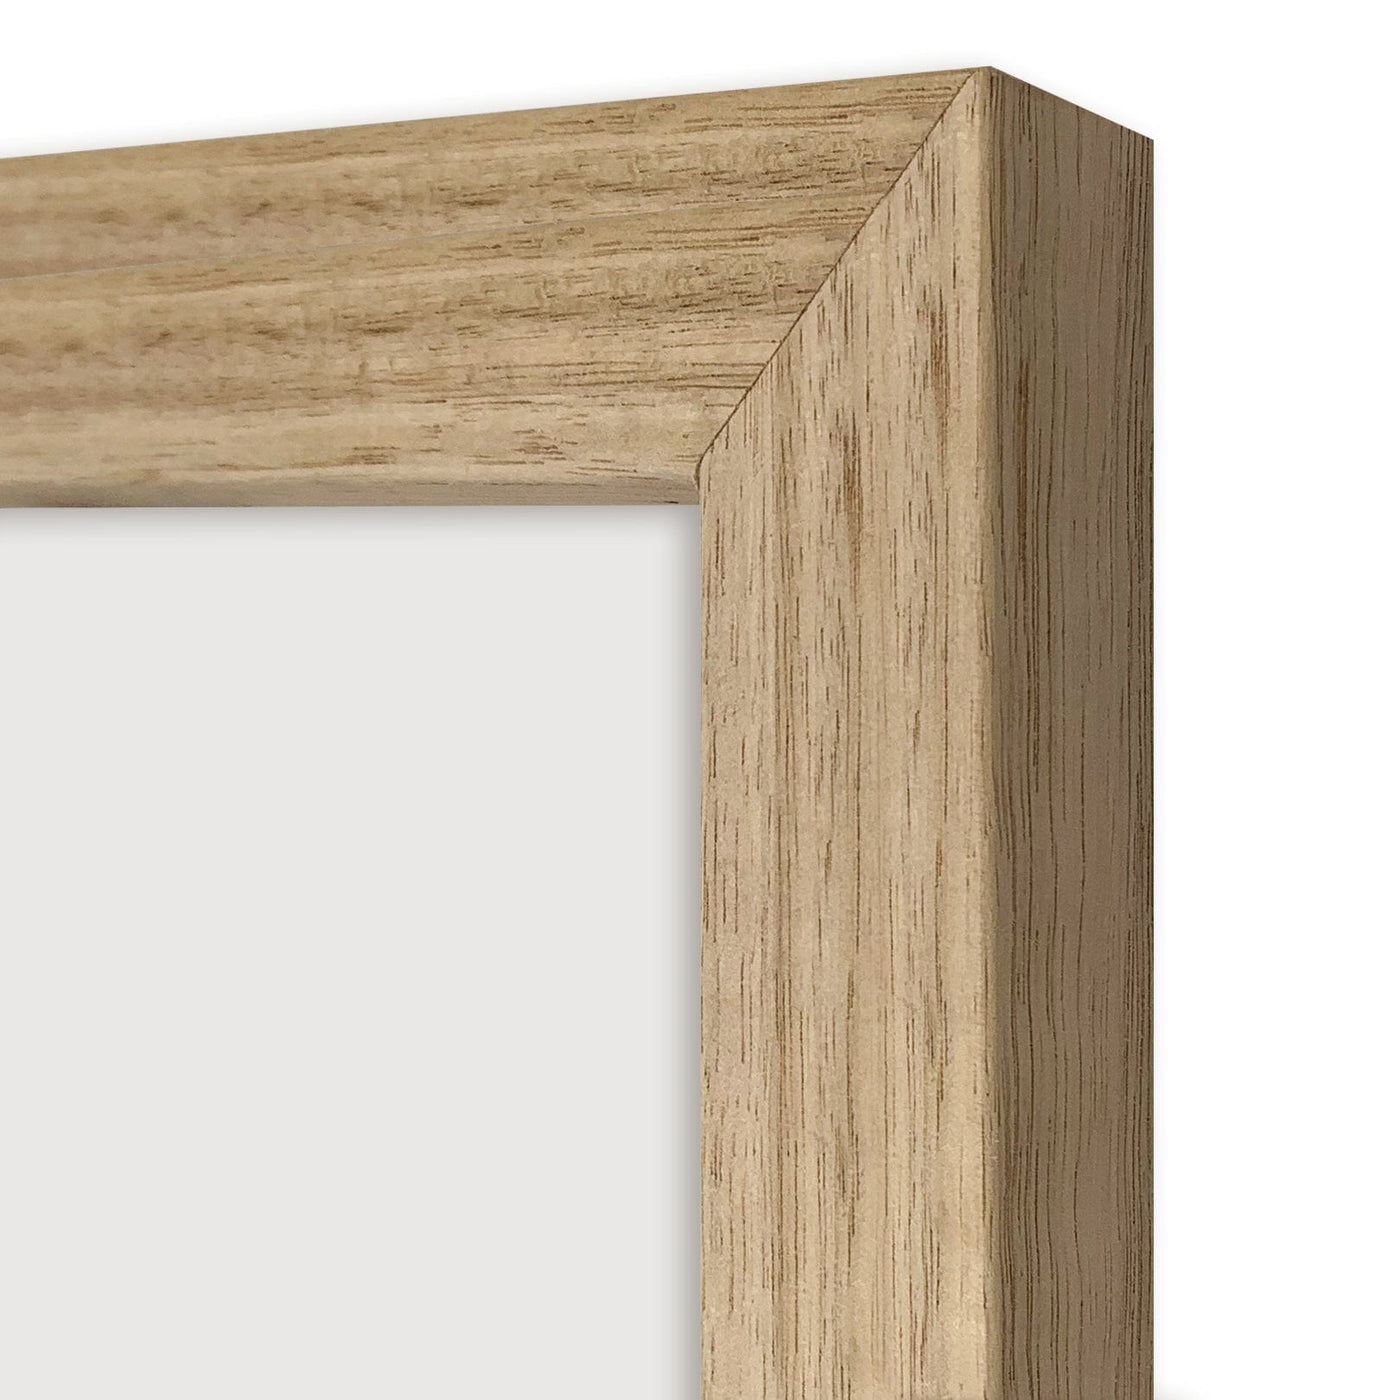 Classic Victorian Ash A2 Picture Frame to suit A3 image from our Australian Made A2 Picture Frames collection by Profile Products Australia